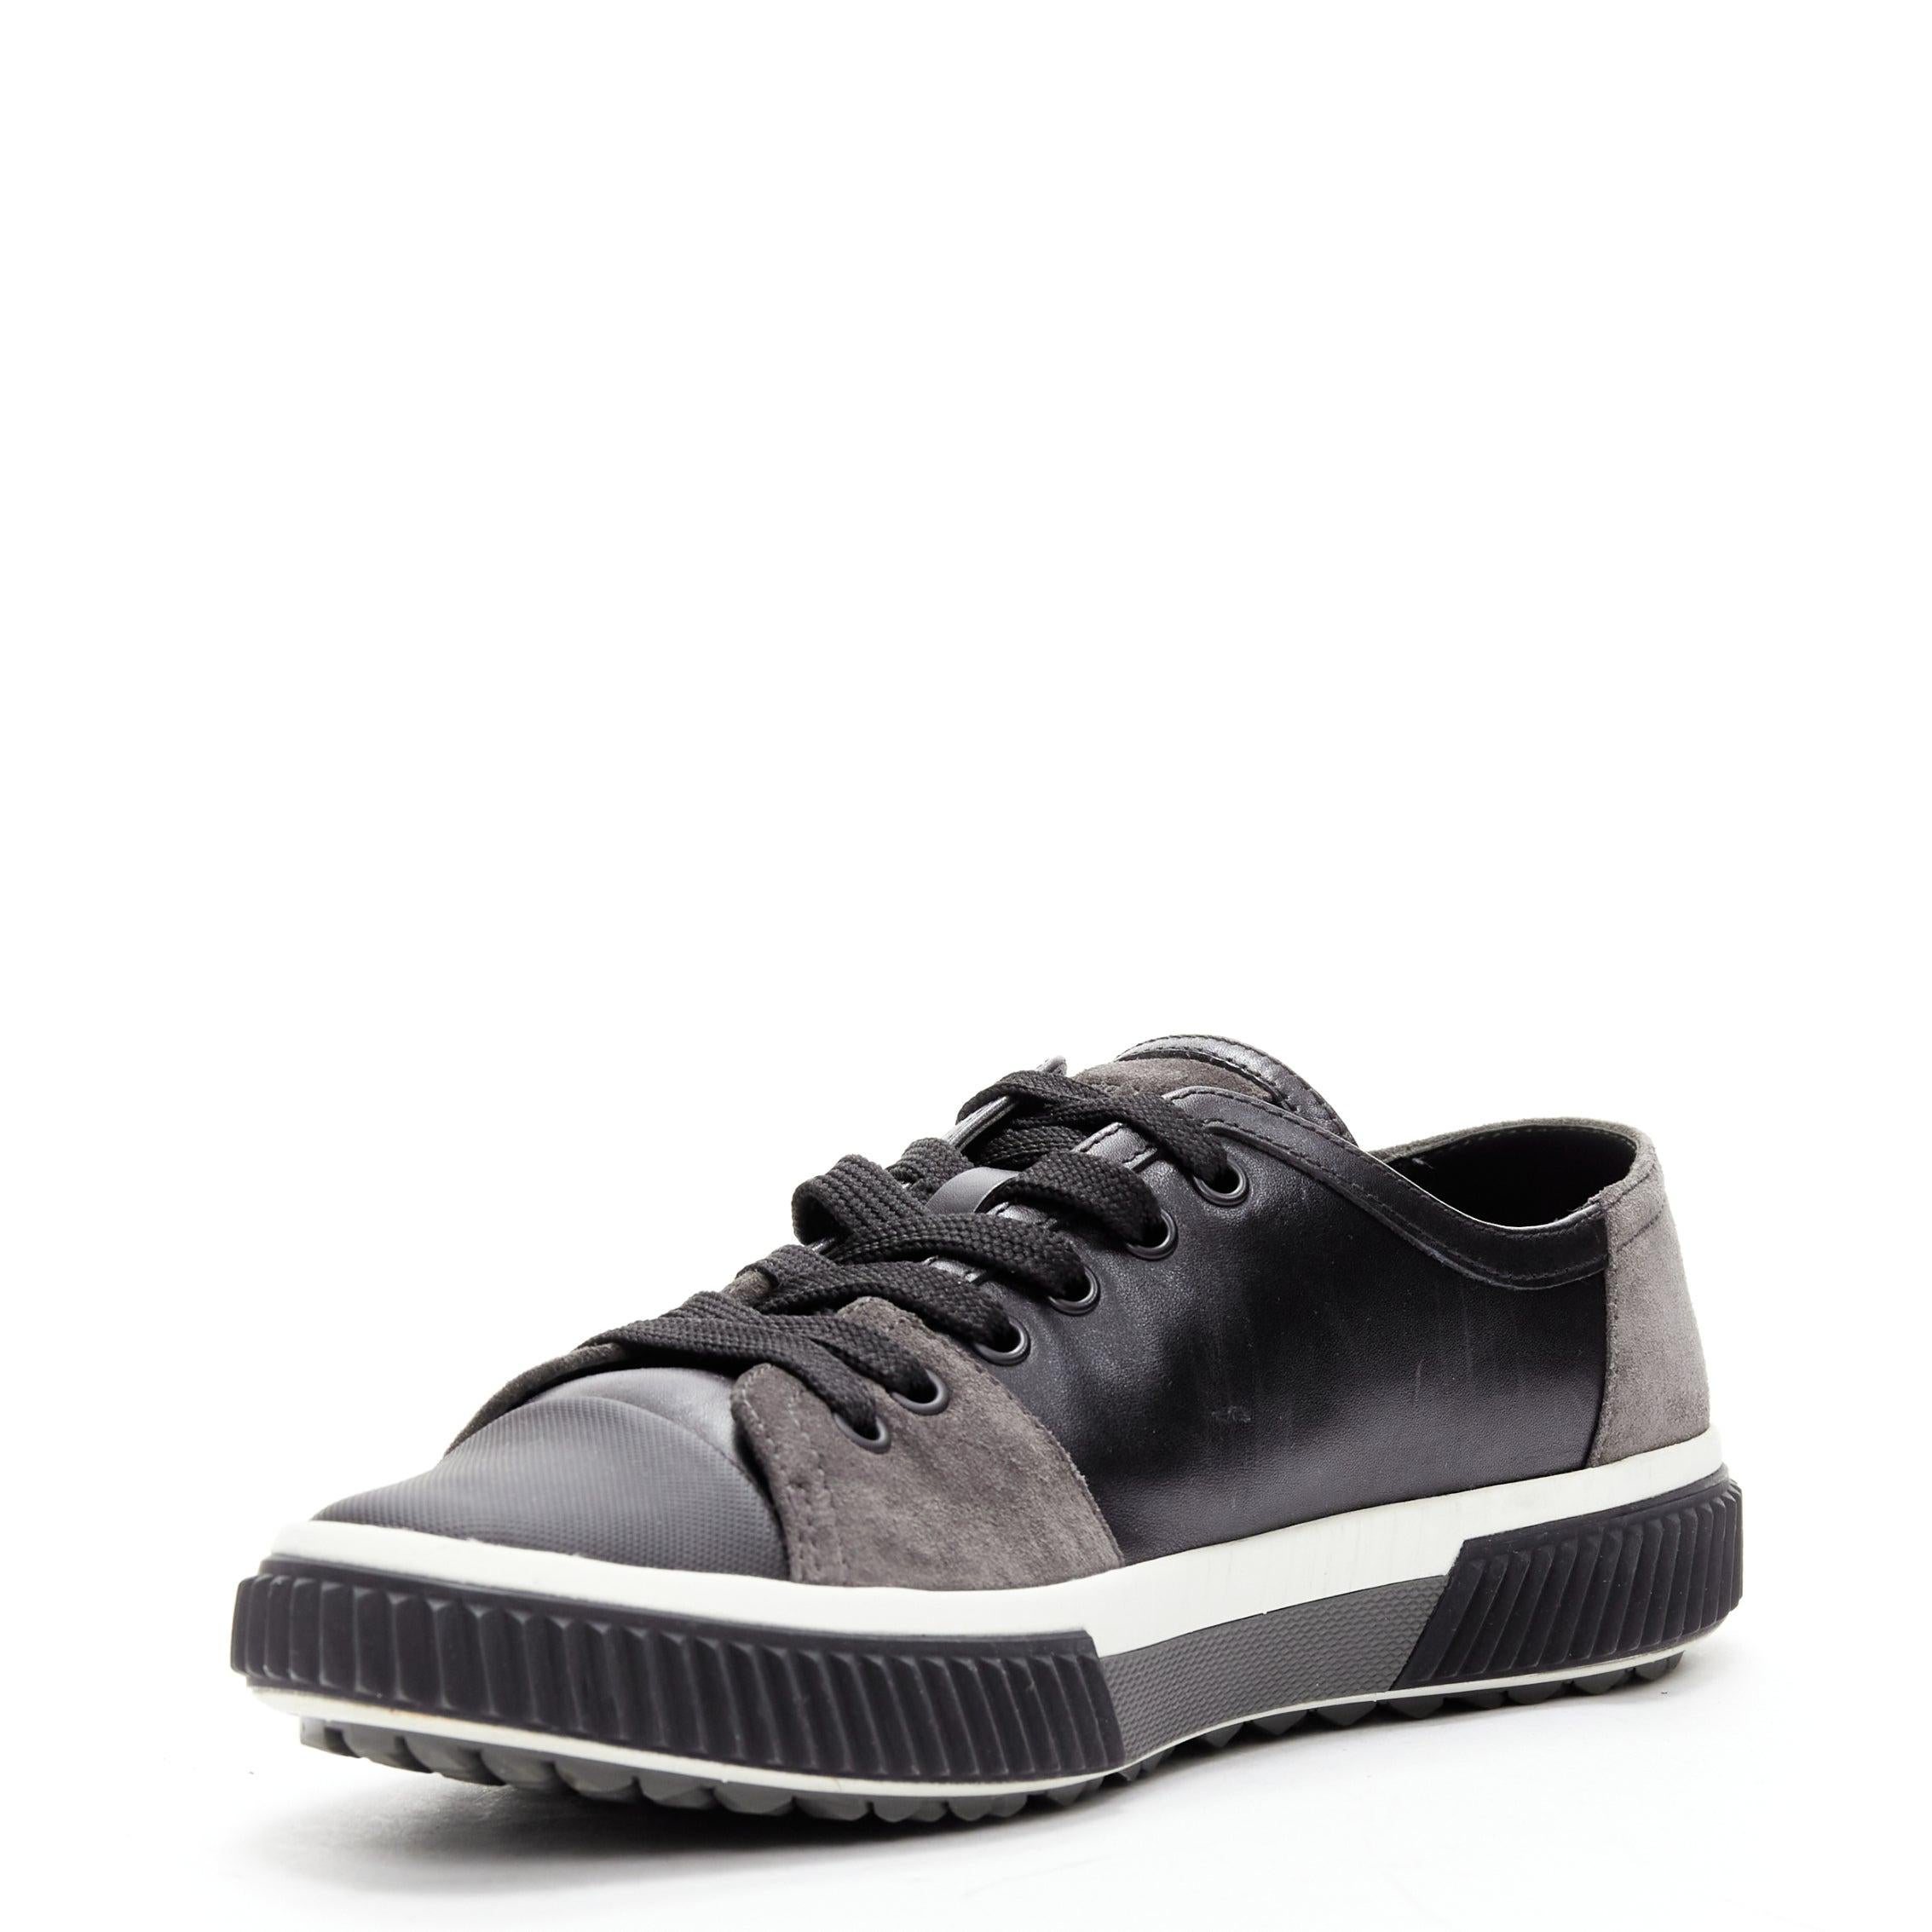 PRADA Stratus black grey suede leather low top sneakers UK5.5 EU39.5 In Good Condition For Sale In Hong Kong, NT